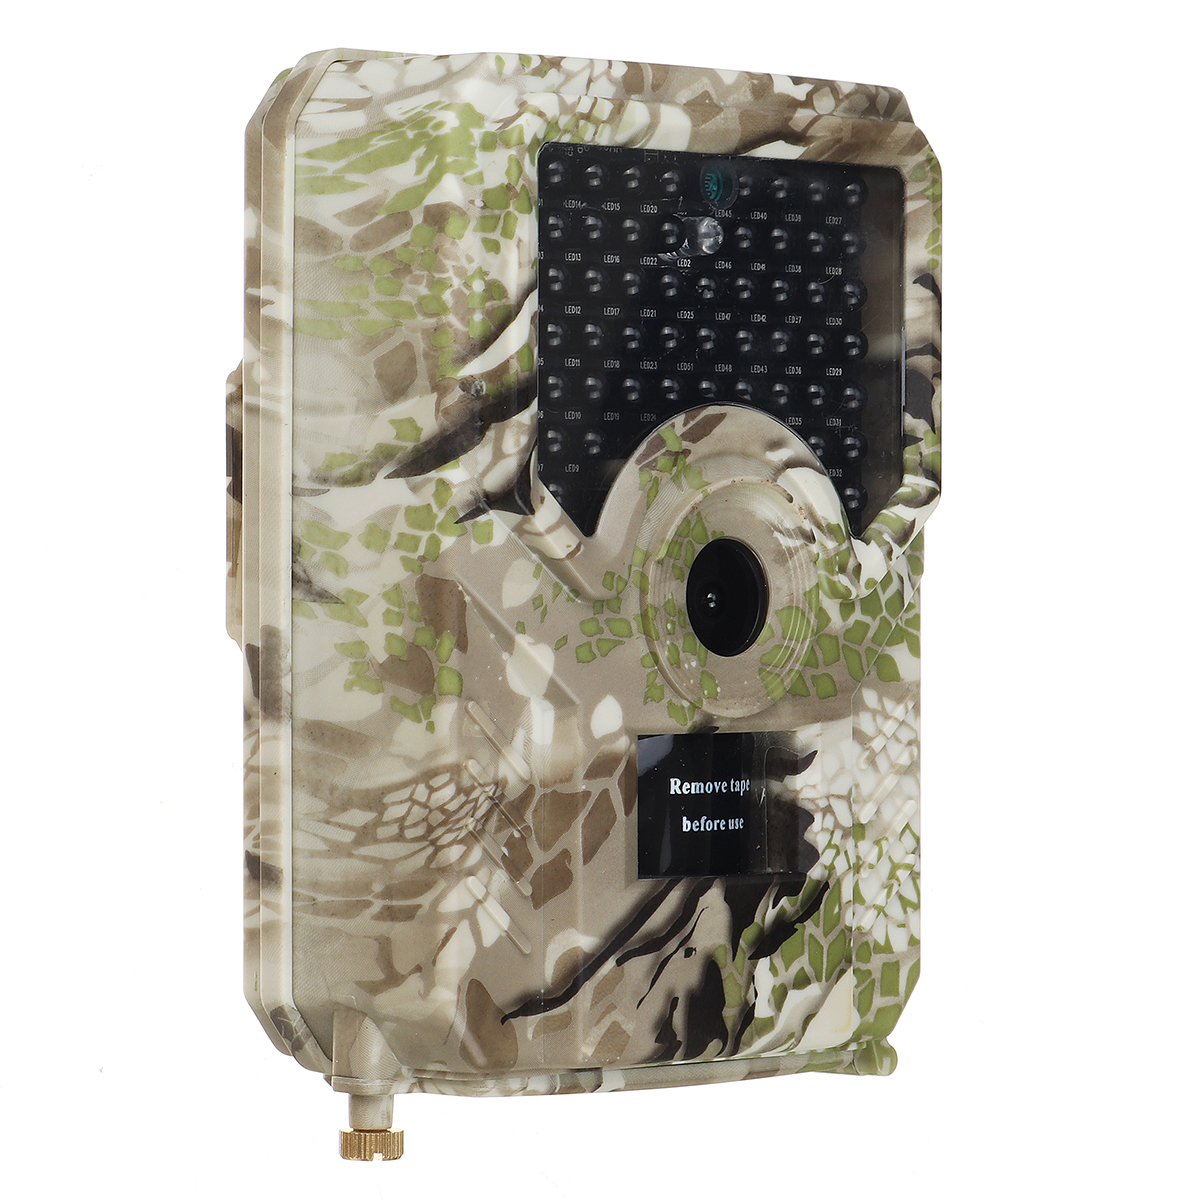 Find PR200 Outdoor Hunting Camera 1080P IR Night Vision HD Trail Wildlife Tracing Game IP56 for Sale on Gipsybee.com with cryptocurrencies